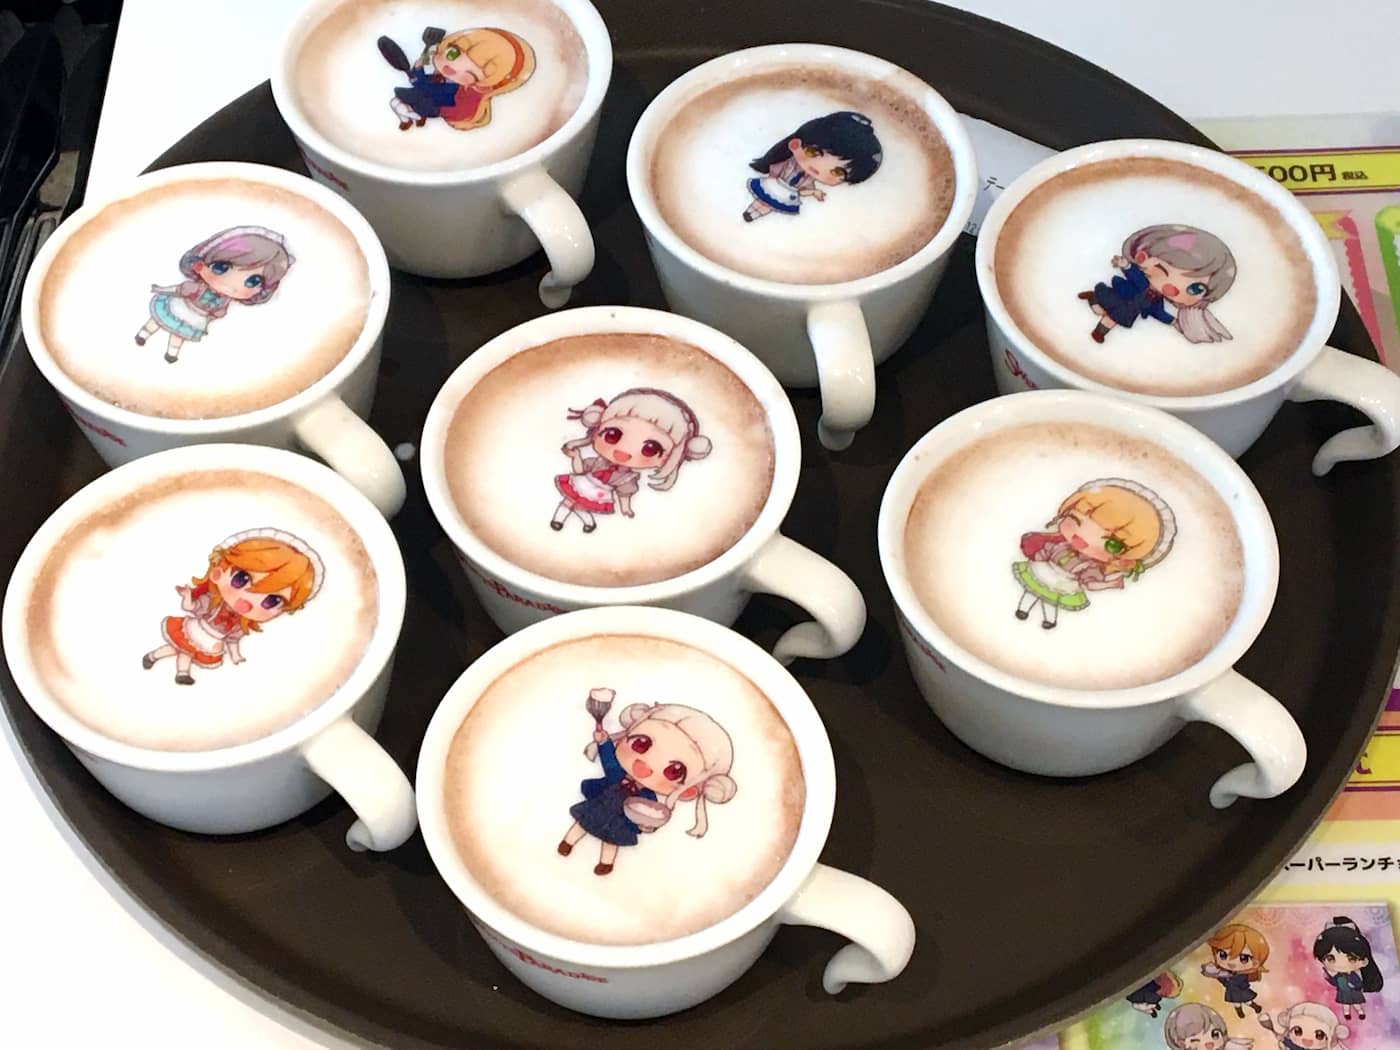 A selection of lattes featuring latte art of characters from the anime show Love Live! Superstar!!